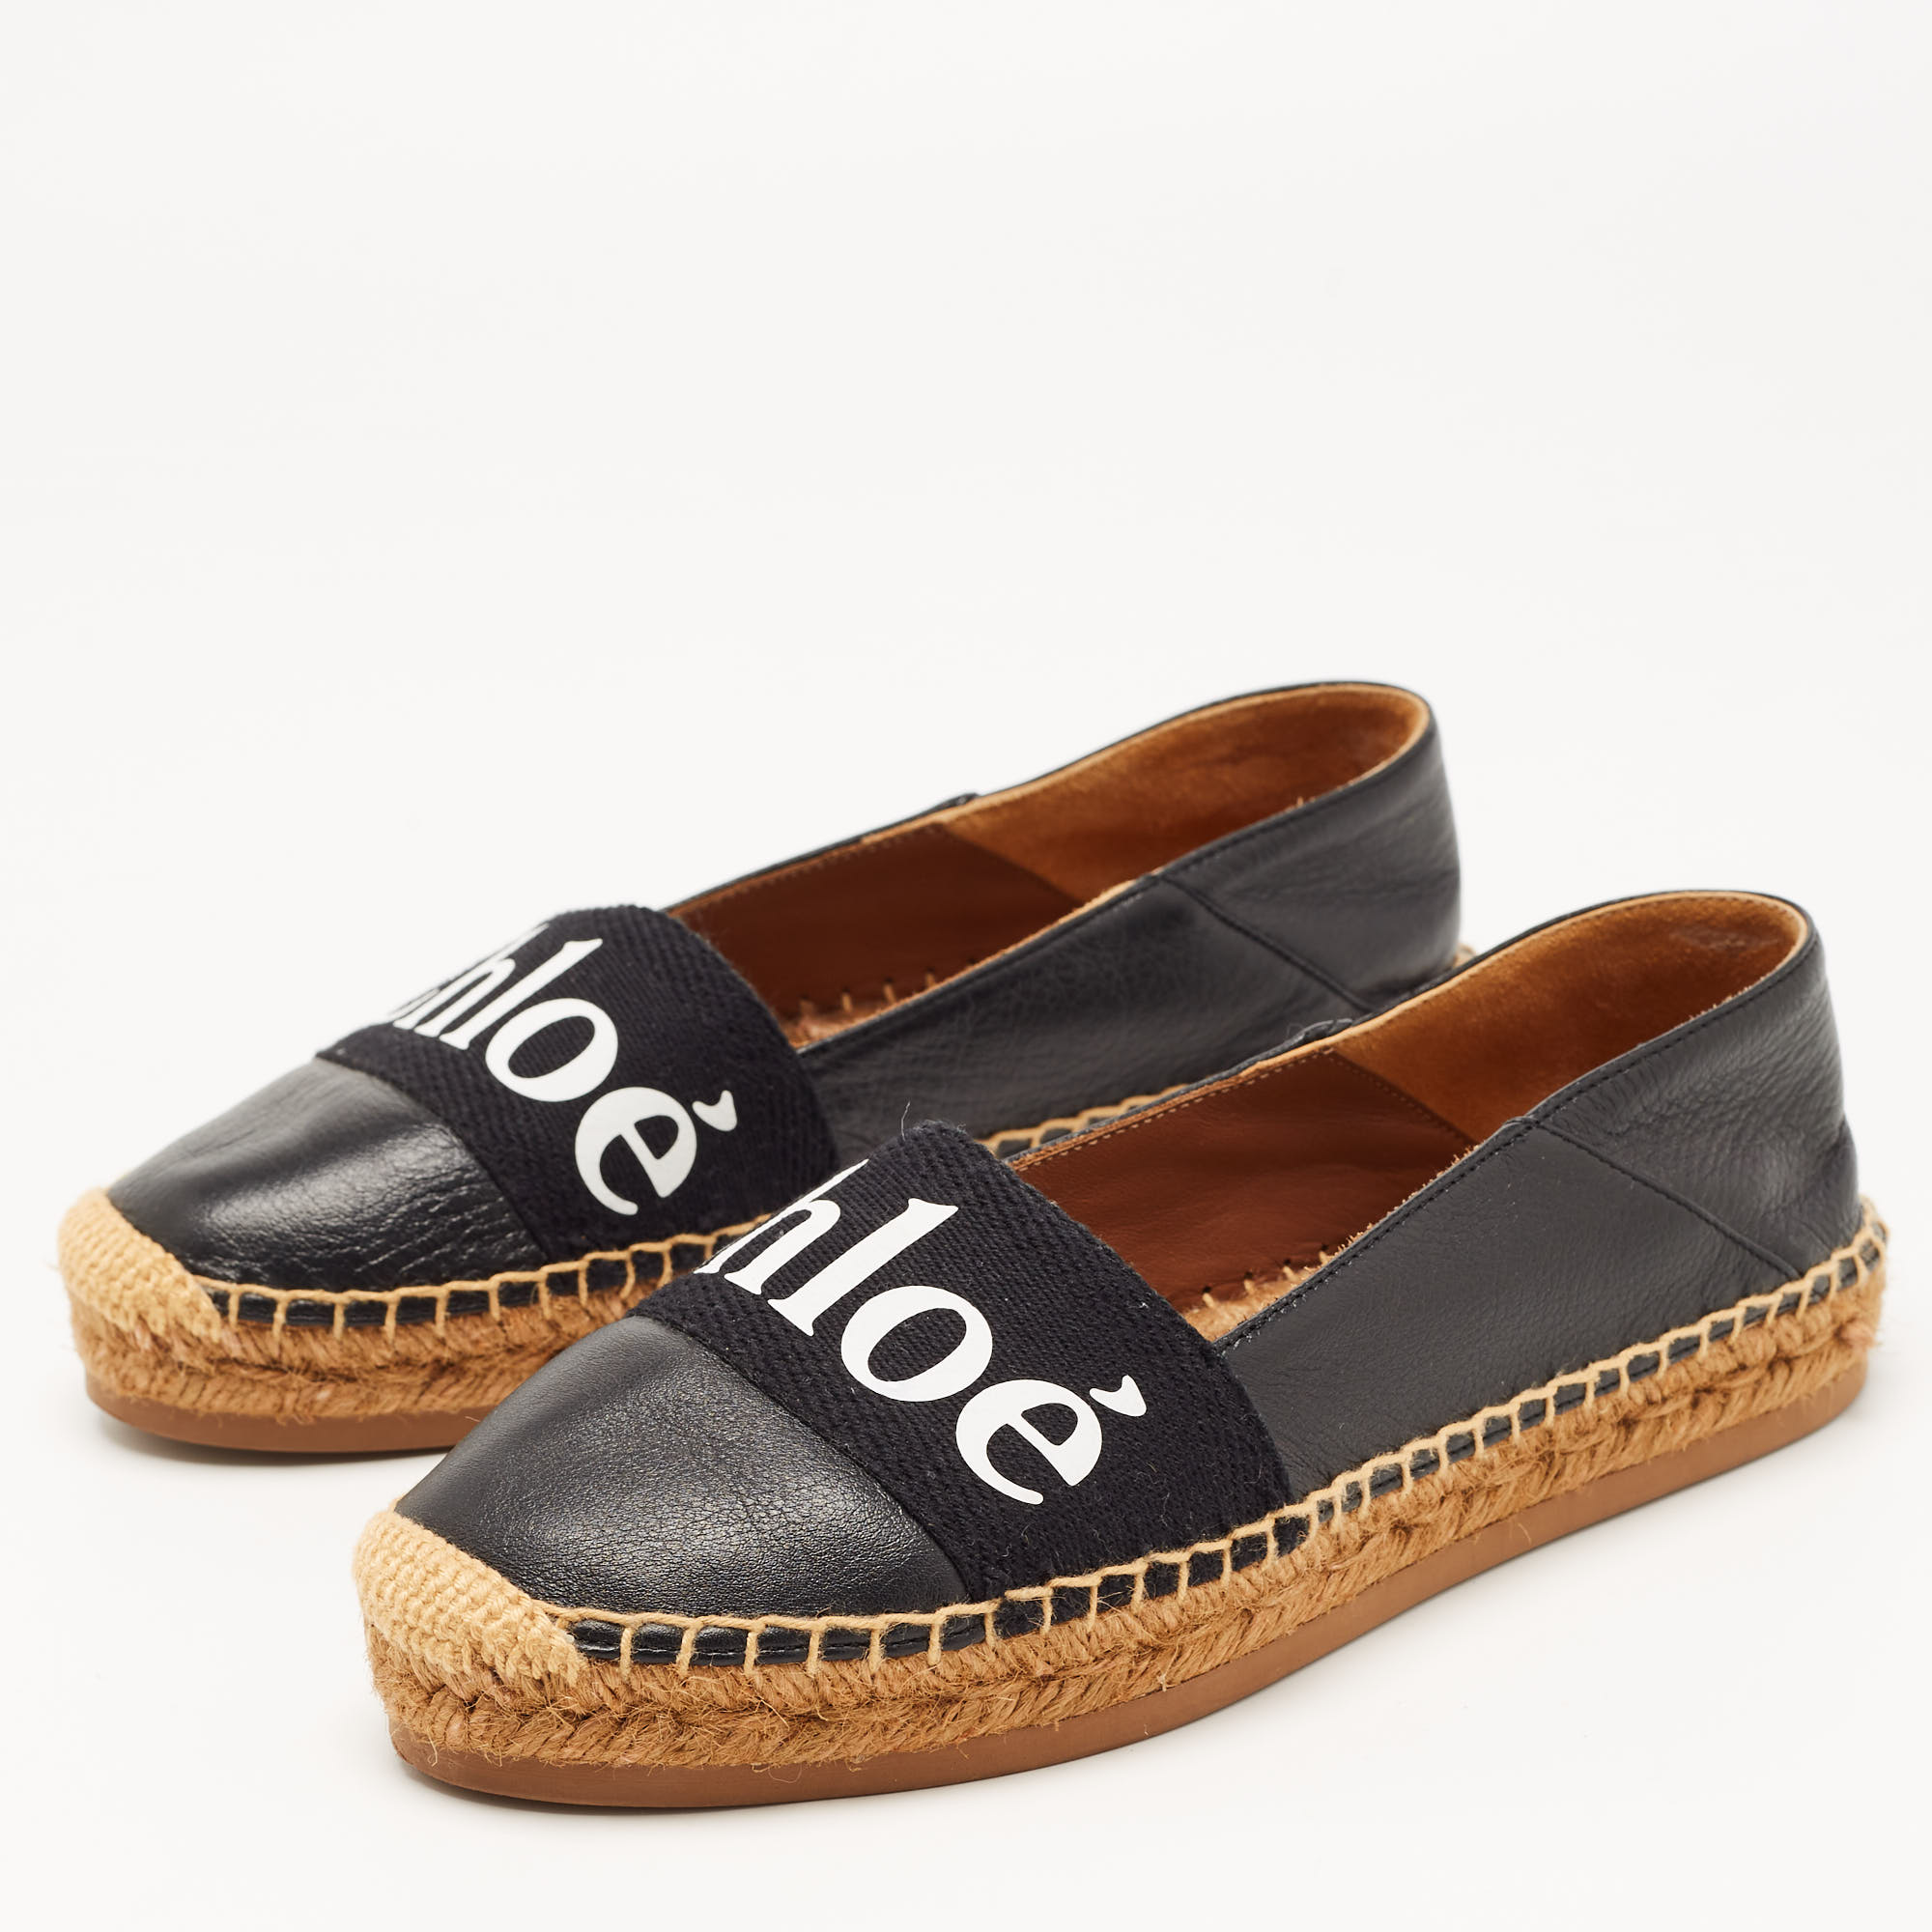 

Chloe Black Leather and Logo Canvas Woody Espadrille Flats Size